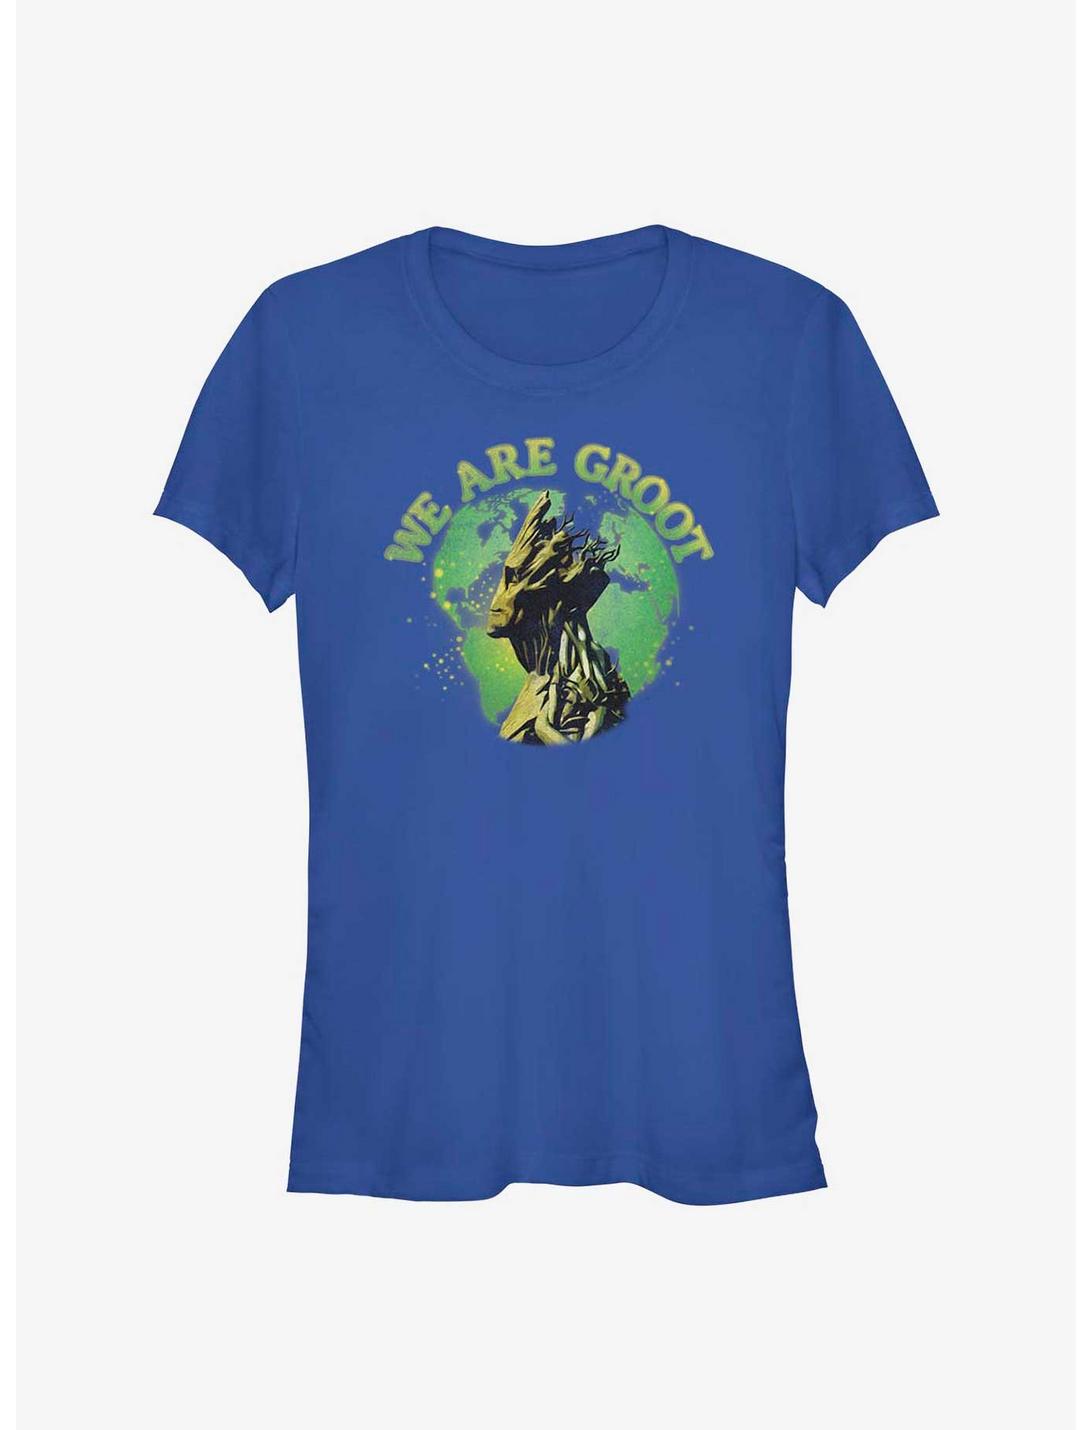 Marvel Guardians of the Galaxy Earth Day We Are Groot Girls T-Shirt, ROYAL, hi-res